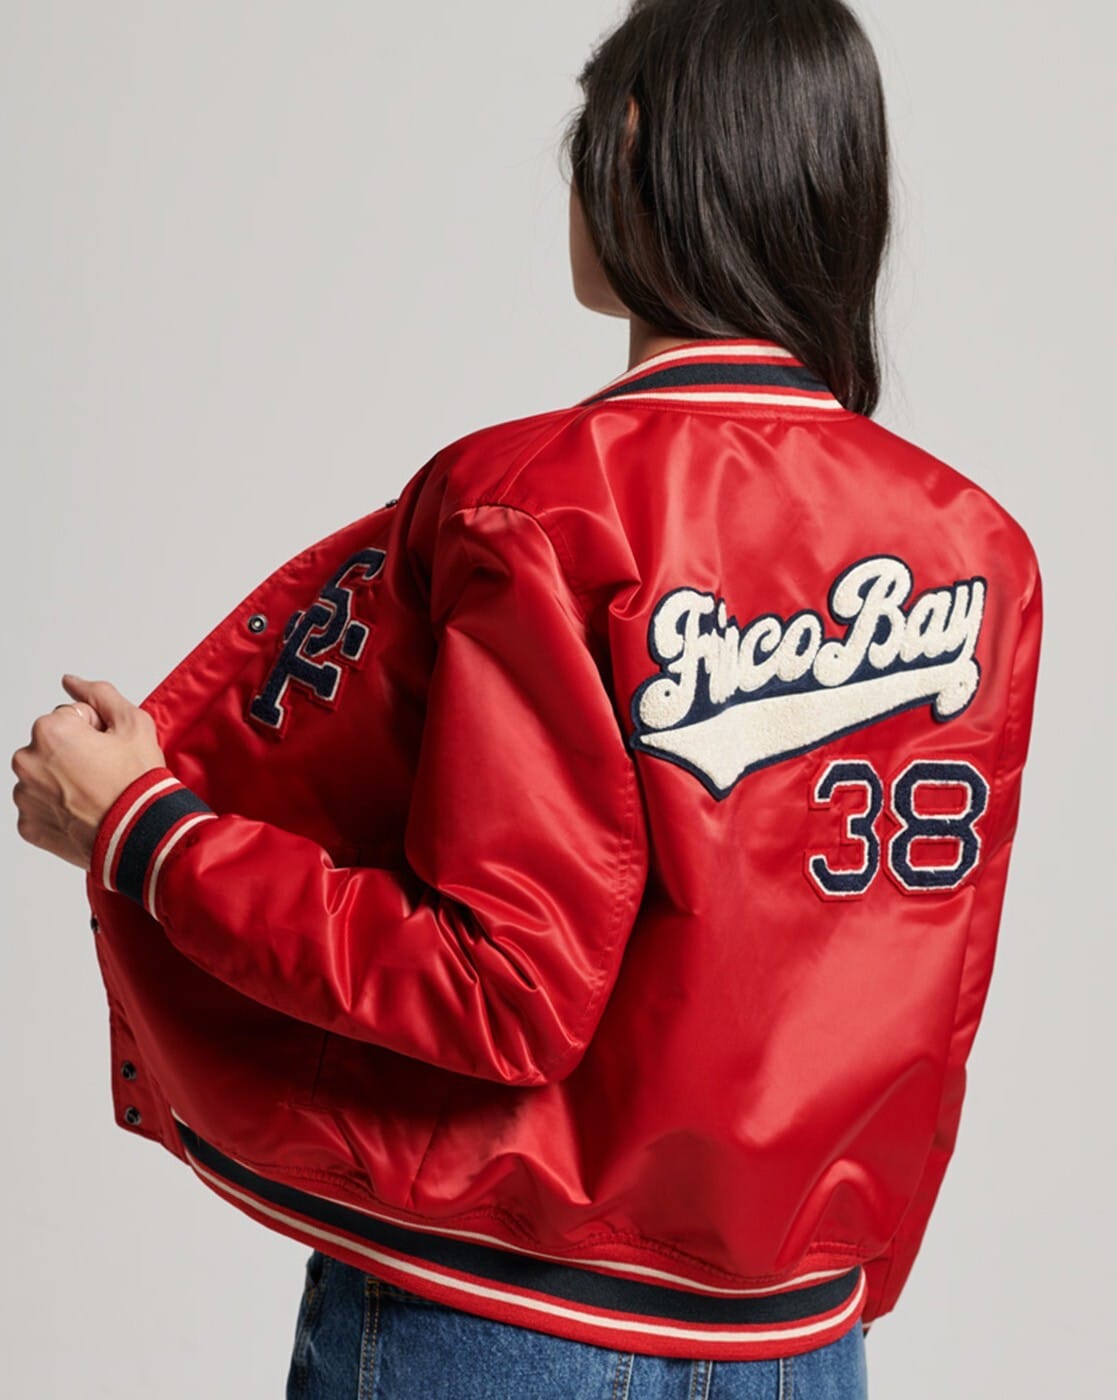 This Is the Varsity Jacket Women Want You to Wear | GQ-cokhiquangminh.vn